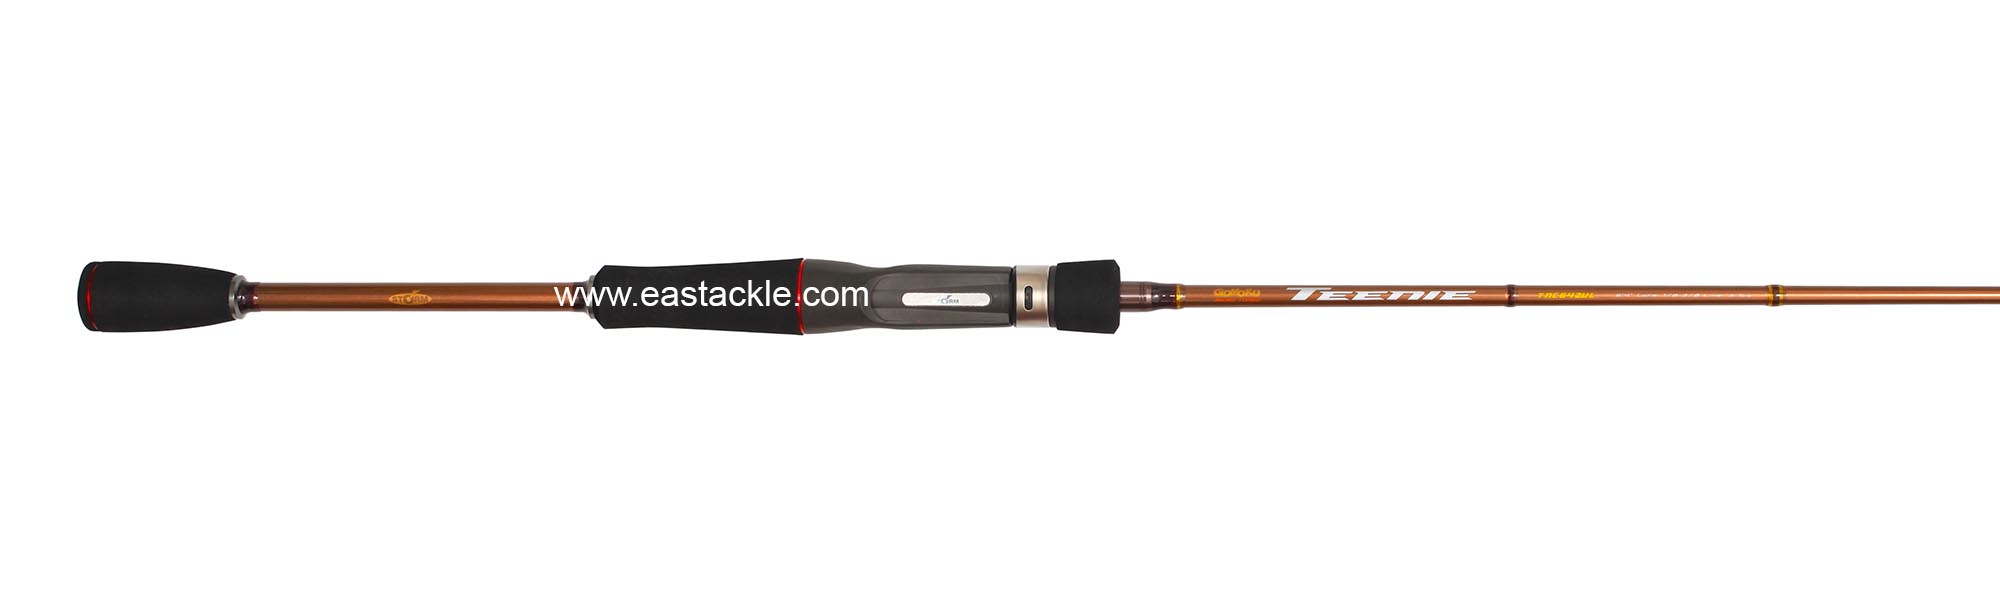 Storm - Teenie - TNC642UL - Bait Casting Rod - Butt to Stripper Guide (Top View) | Eastackle